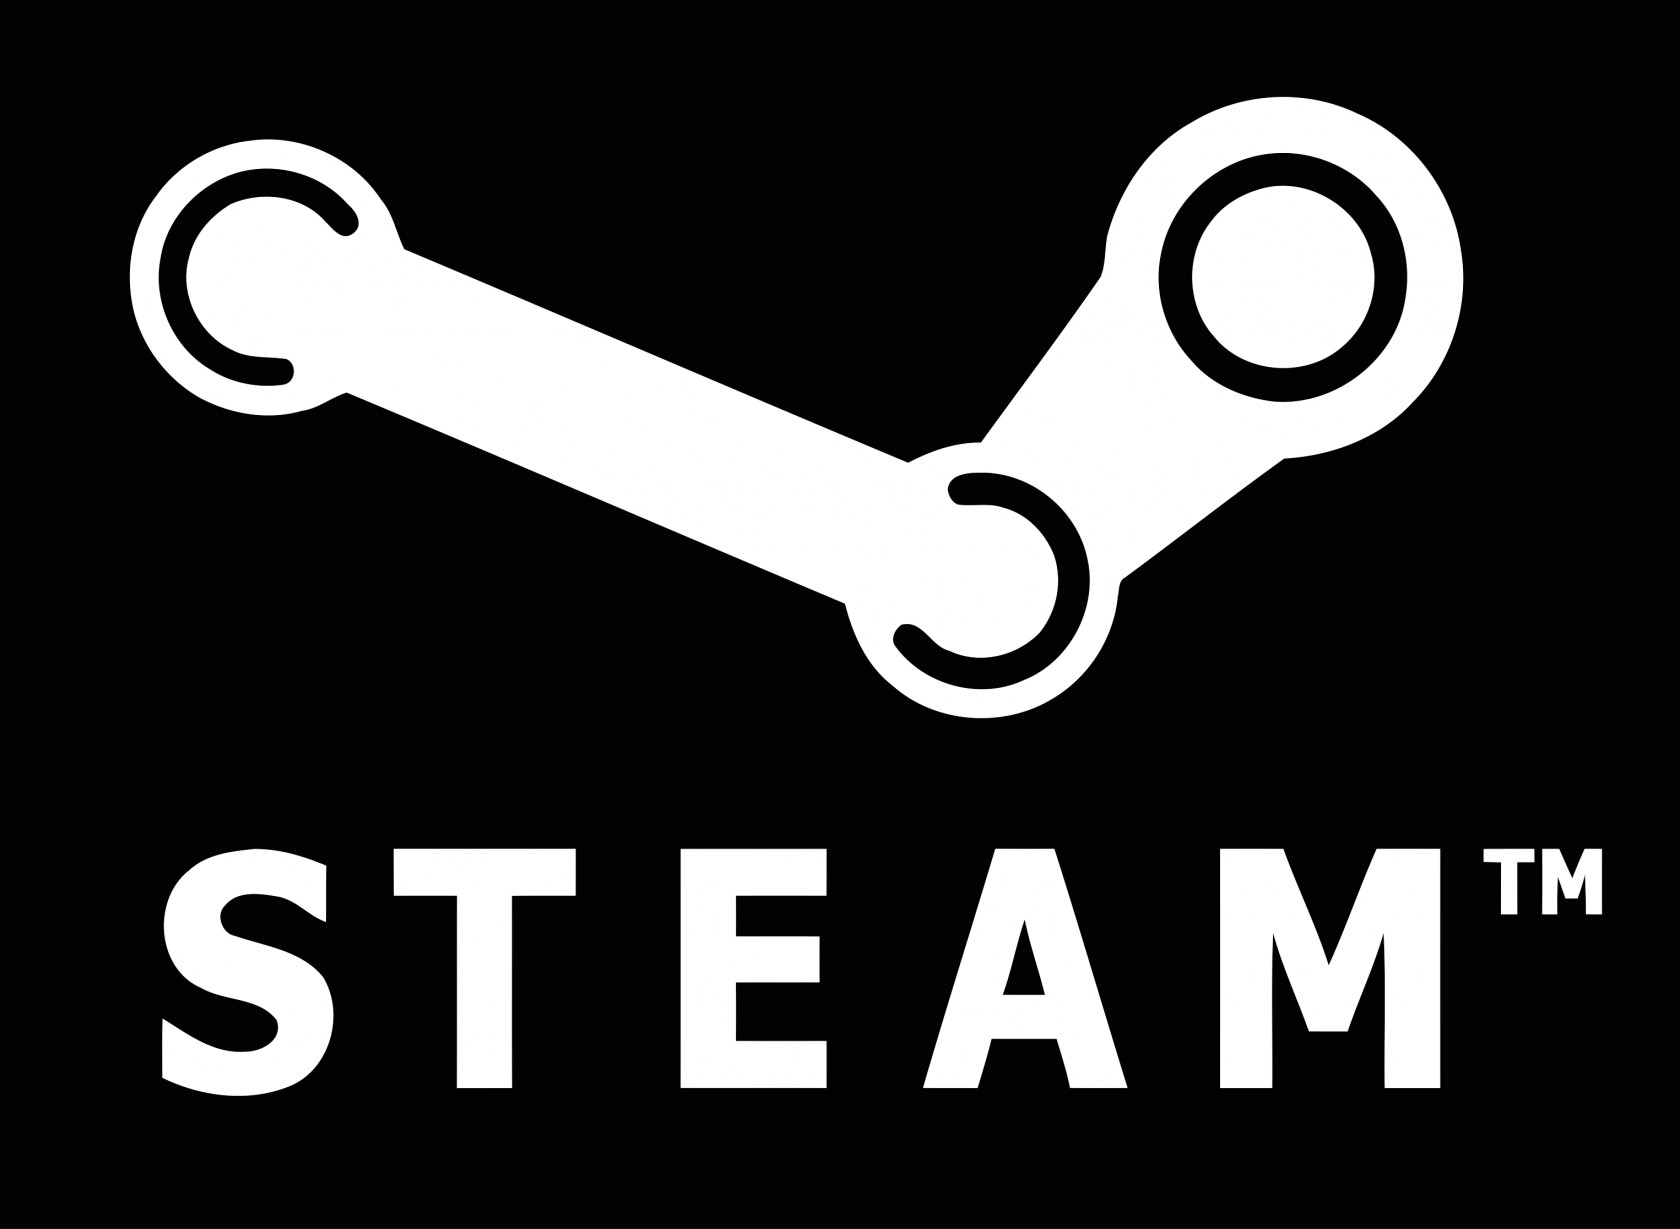 http://icrontic.com/uploads/features/2012/05/Steam-Logo.png